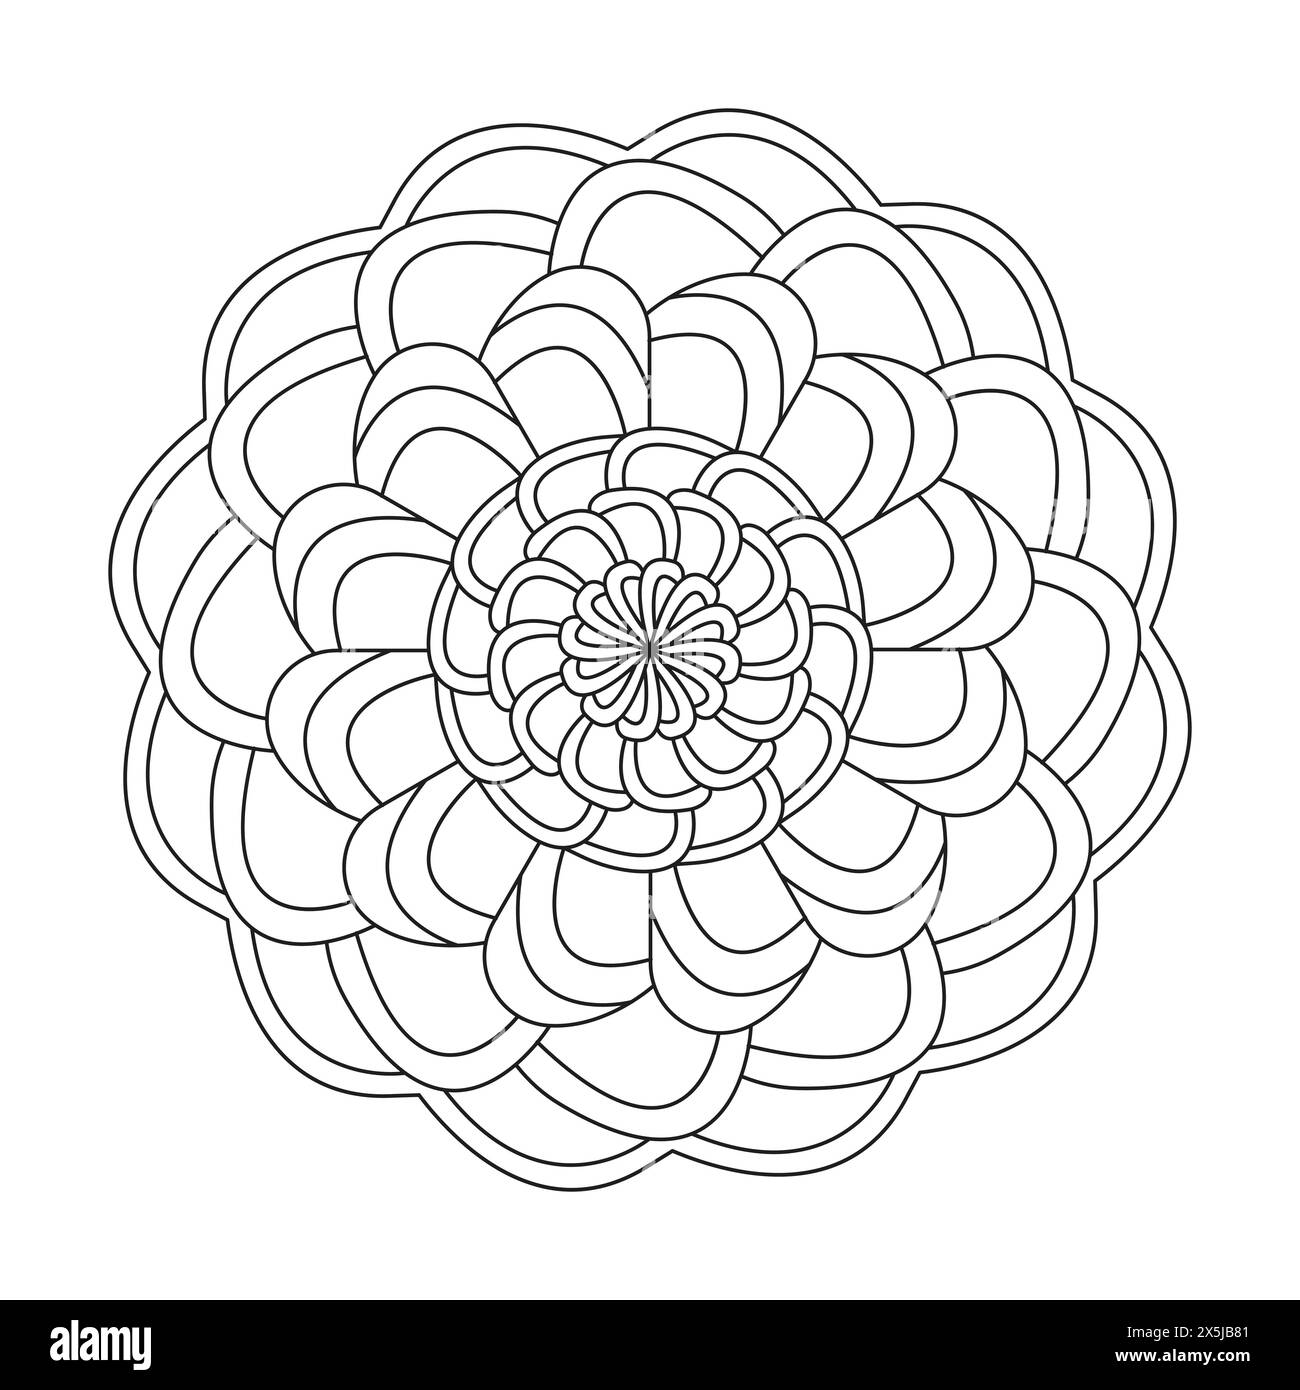 Mandala Relaxation Kids Colouring Book Page for KDP Book Interior. Peaceful Petals, Ability to Relax, Brain Experiences, Harmonious Haven, Peaceful POR Stock Vector